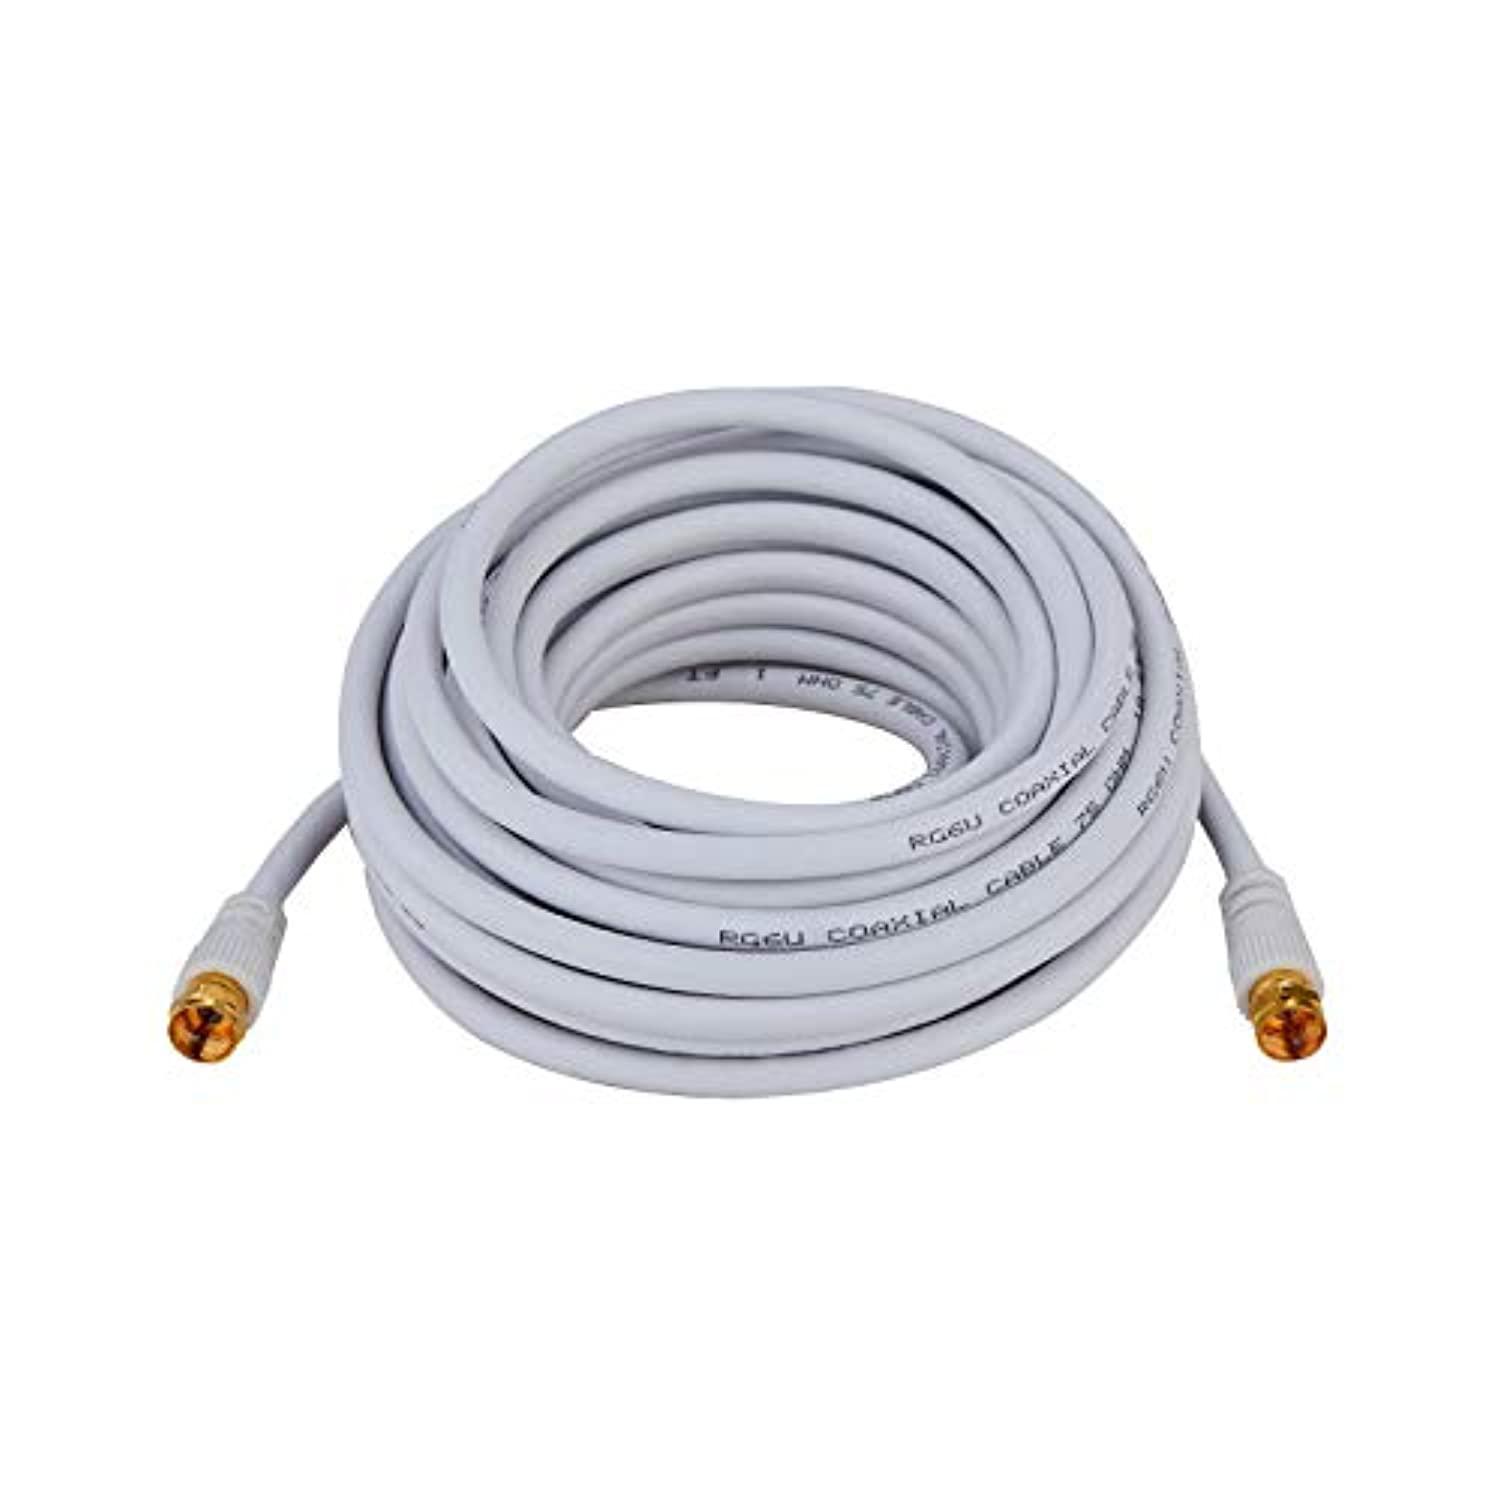 cables direct online 75 feet white rg6 coax cable f pin coaxial tip bnc extension wire for satellite dish cable tv antenna